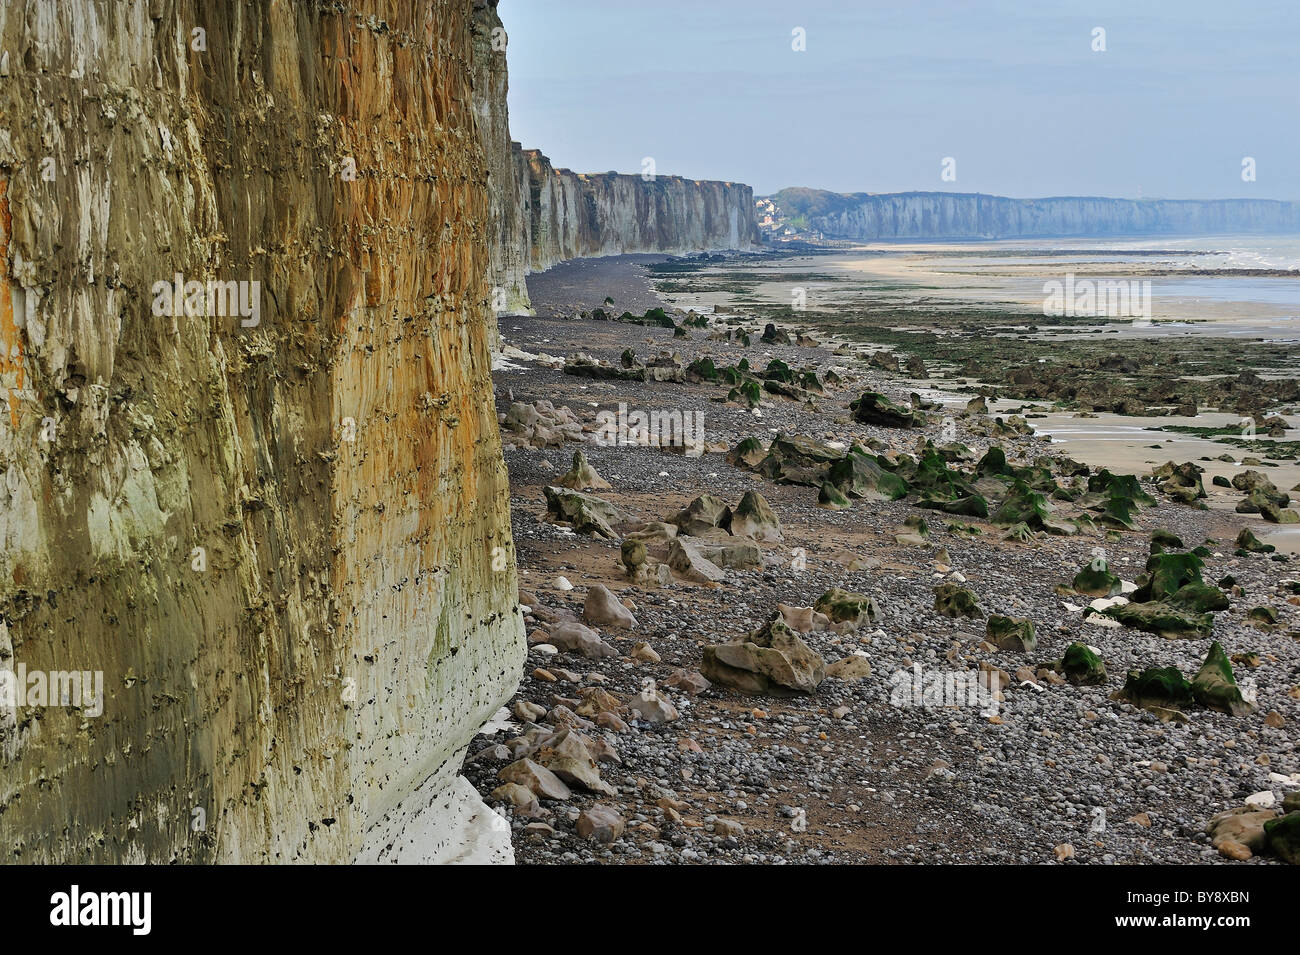 Eroded chalk cliffs rising up from pebble beach at Sotteville-sur-Mer, Normandy, France Stock Photo